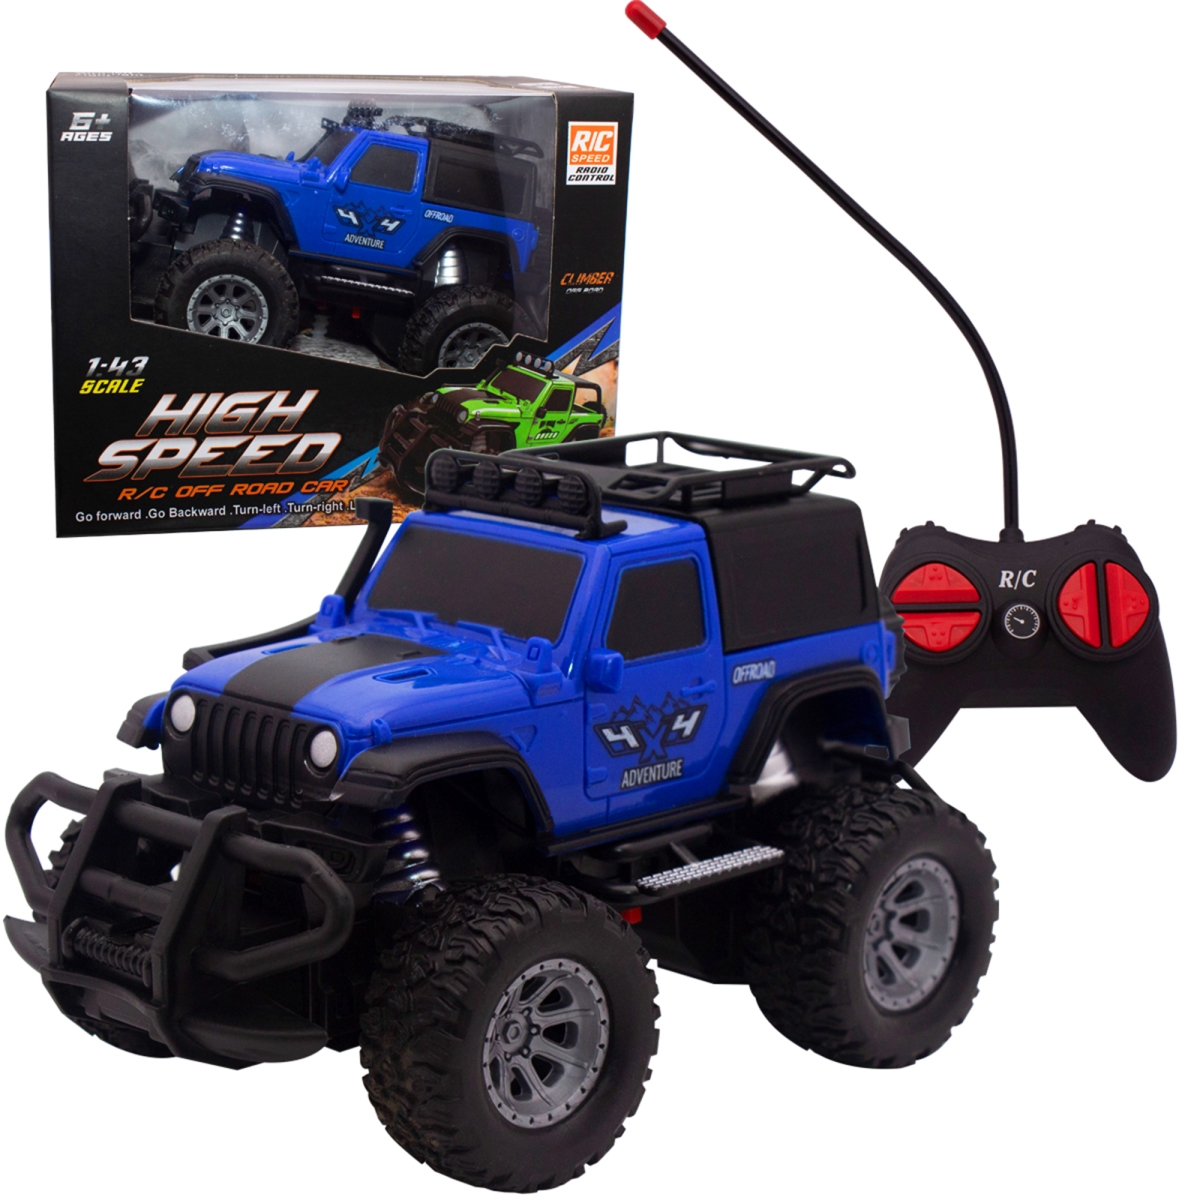 Picture of Zummy FS1158GR Zummy Remote Control Off-Road Style SUV Toy